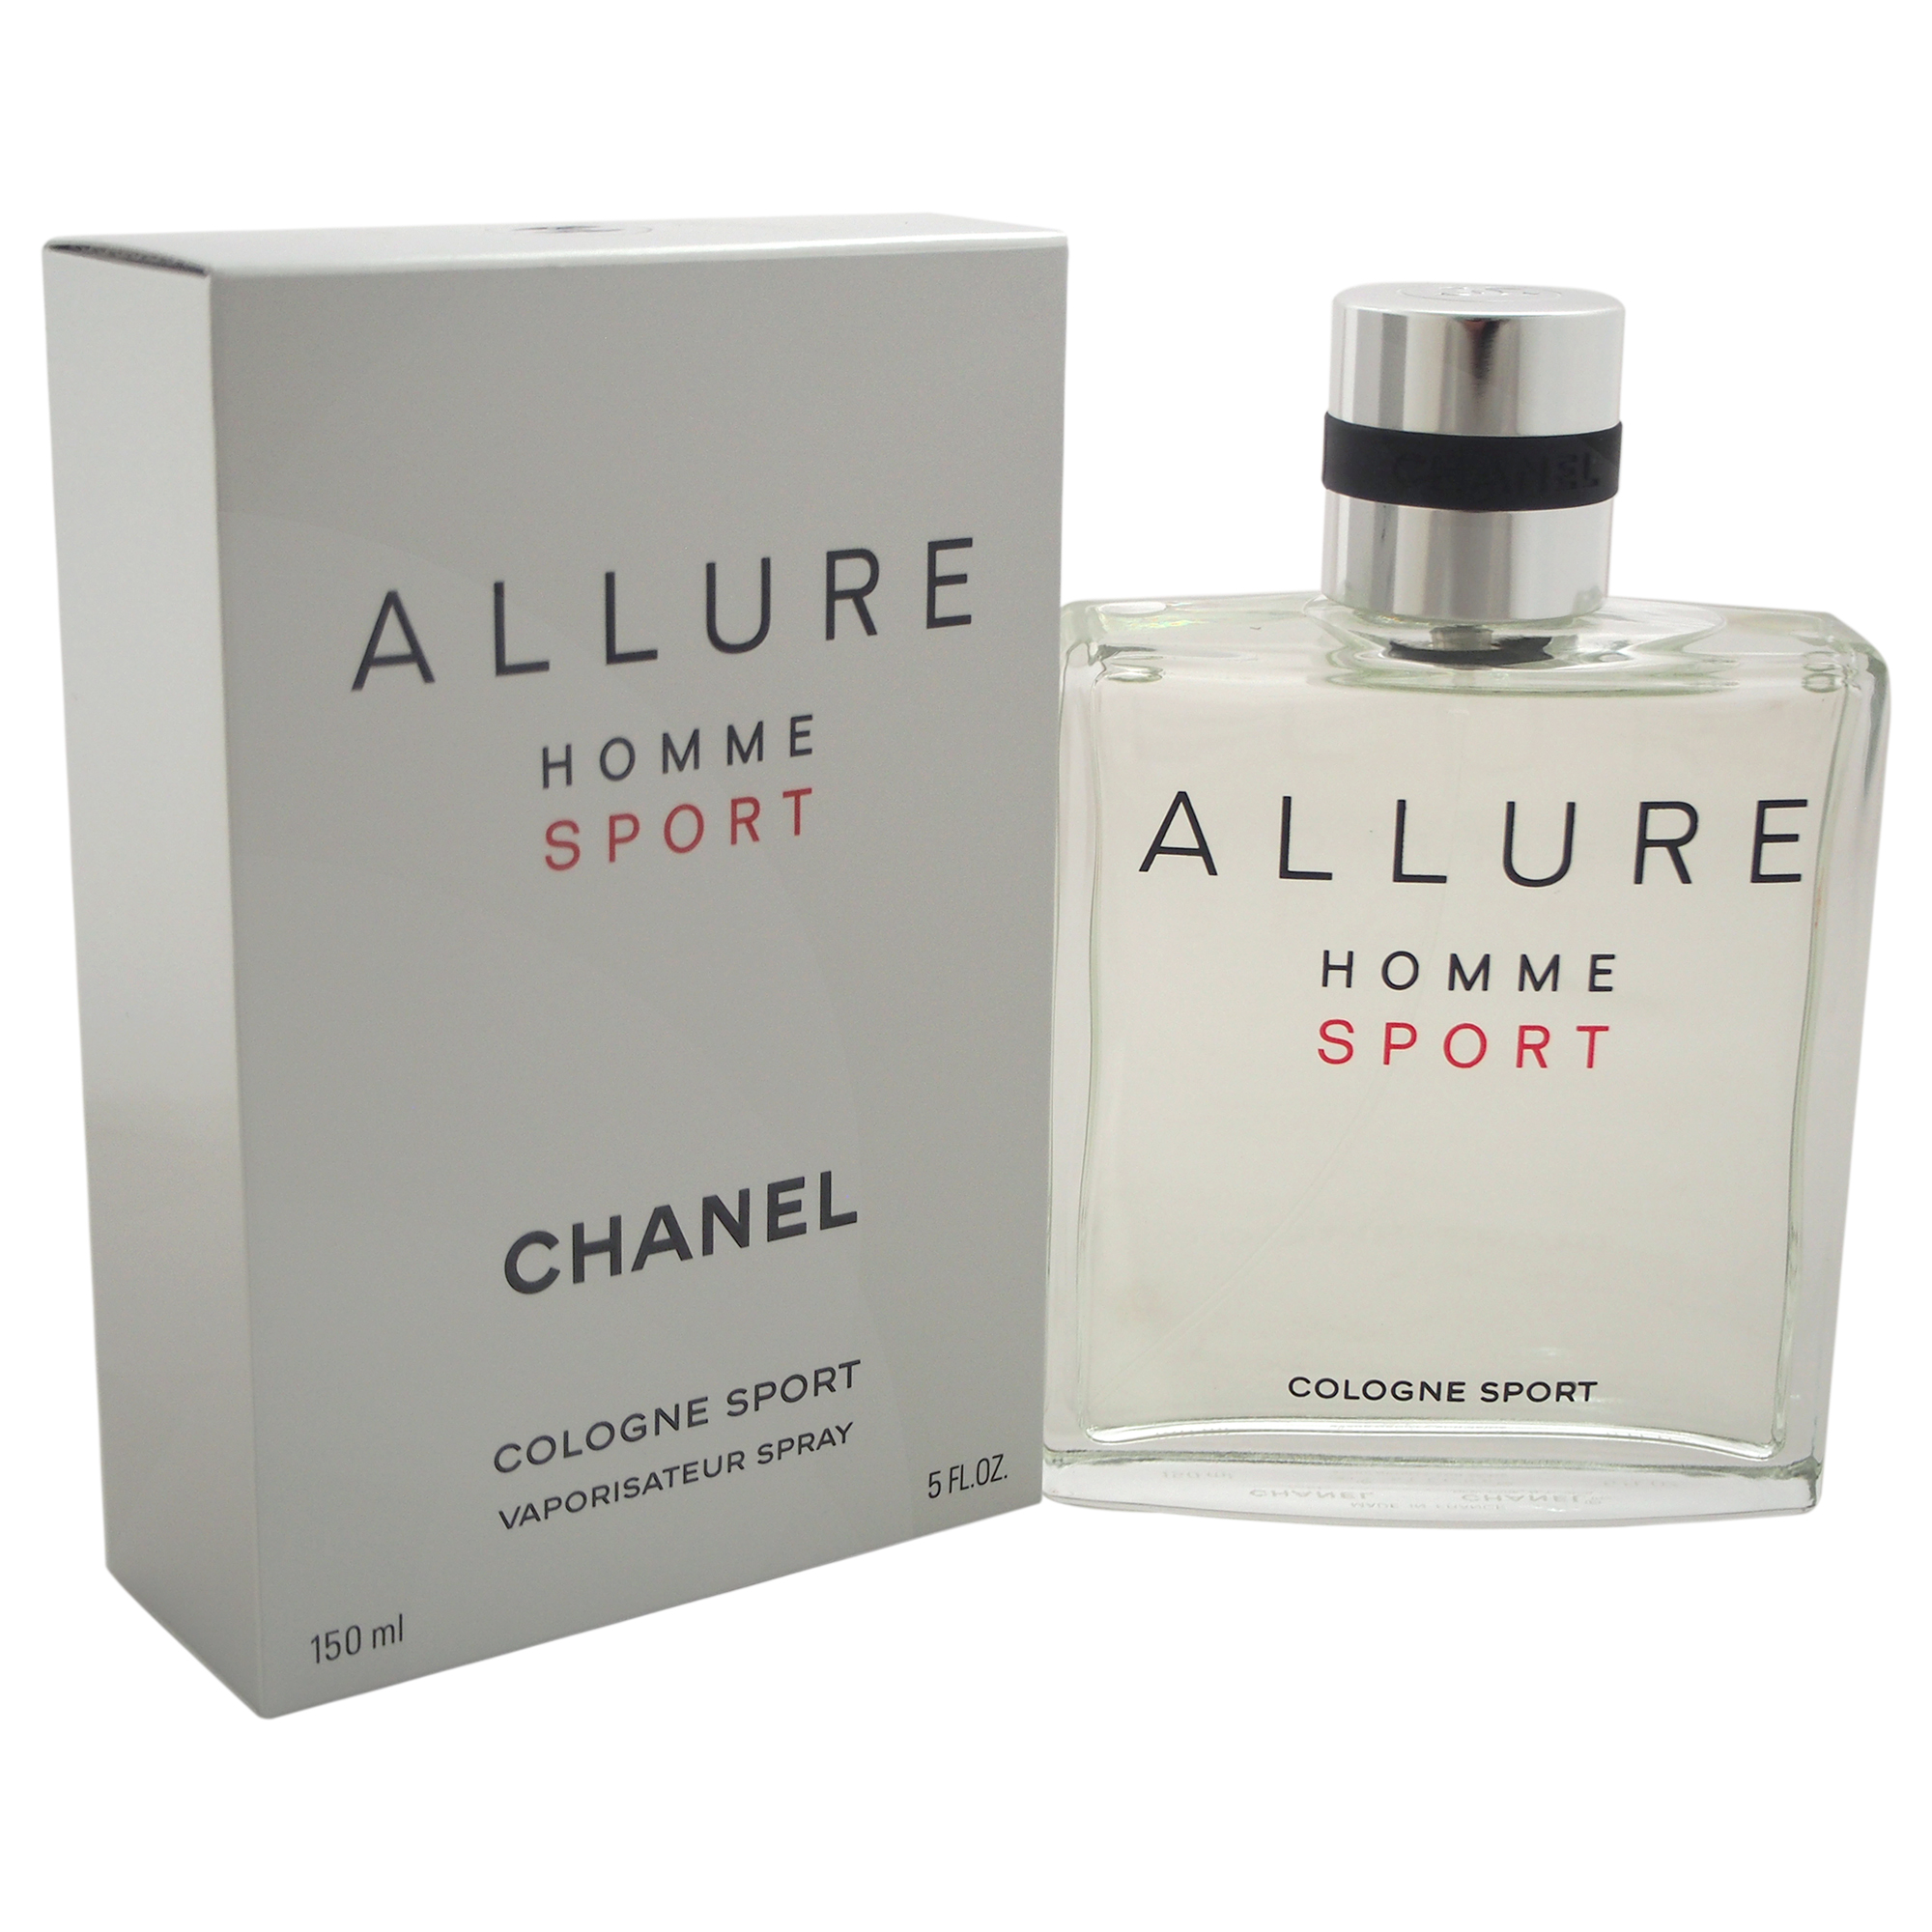 EAN 3145891233803 product image for Allure Homme Sport by Chanel for Men - 5 oz Cologne Spray | upcitemdb.com